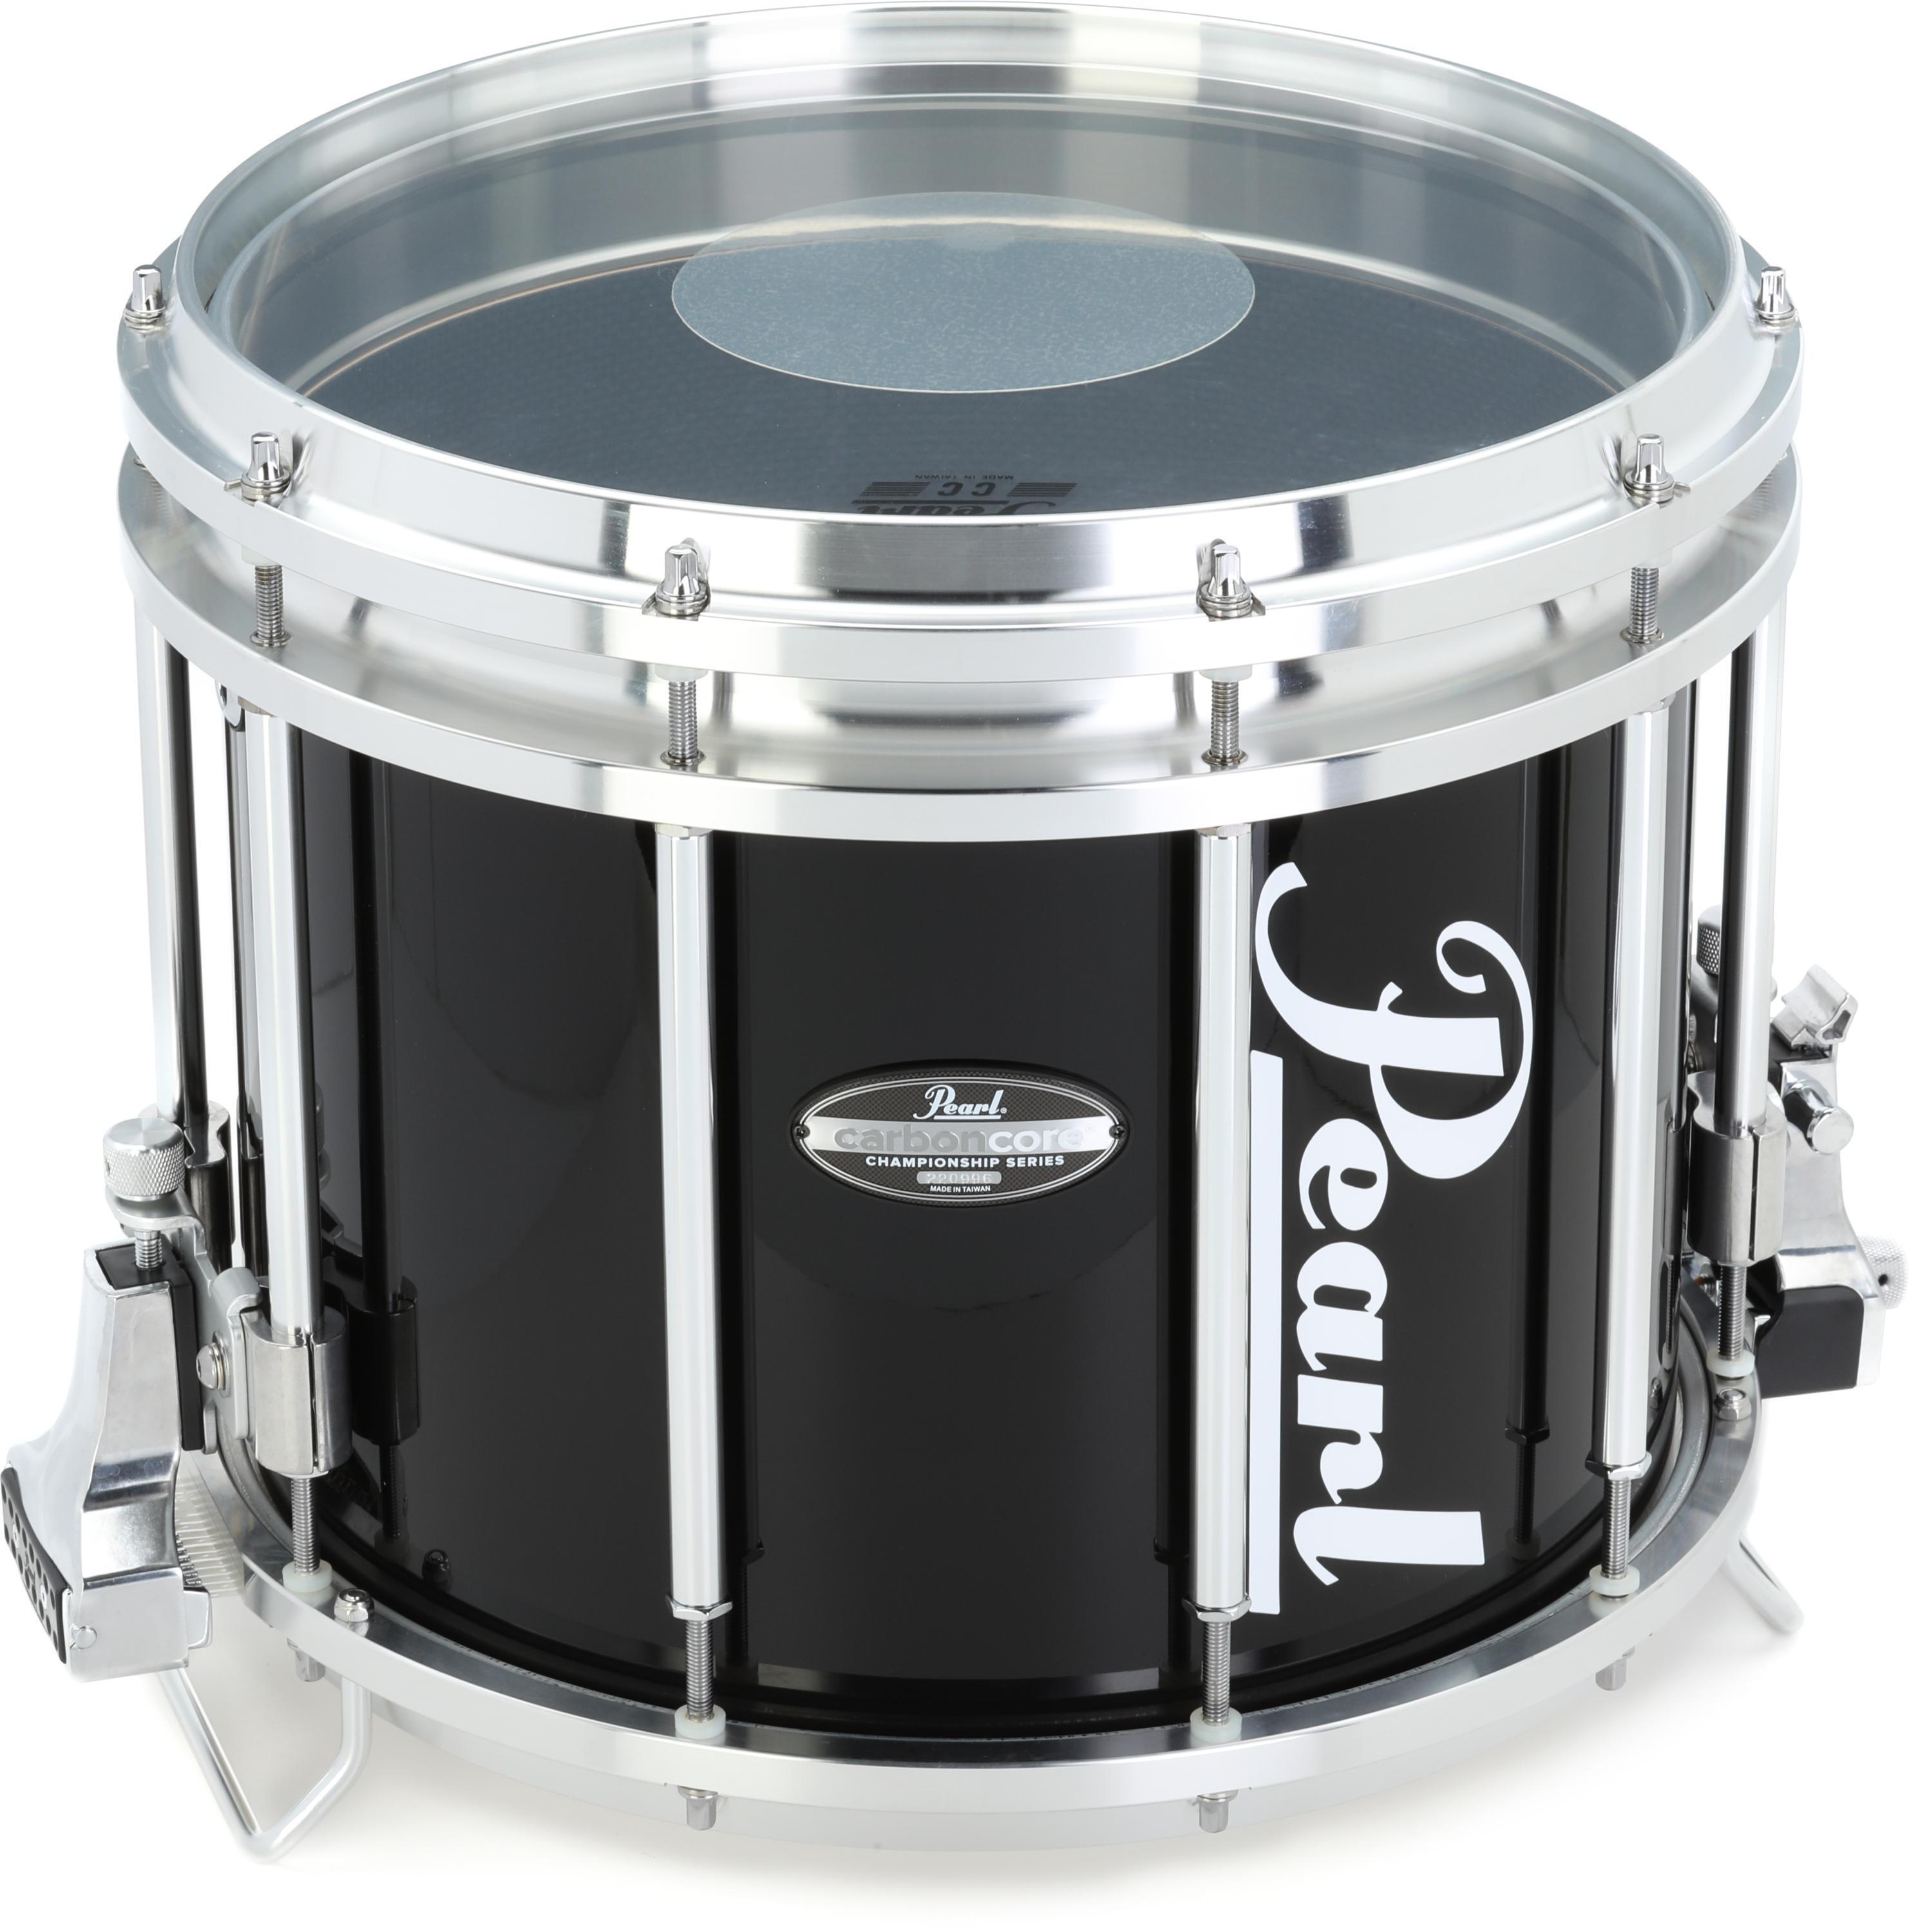 Pearl Championship CarbonCore FFX Marching Snare Drum - 13 x 11 inch -  Piano Black Lacquer